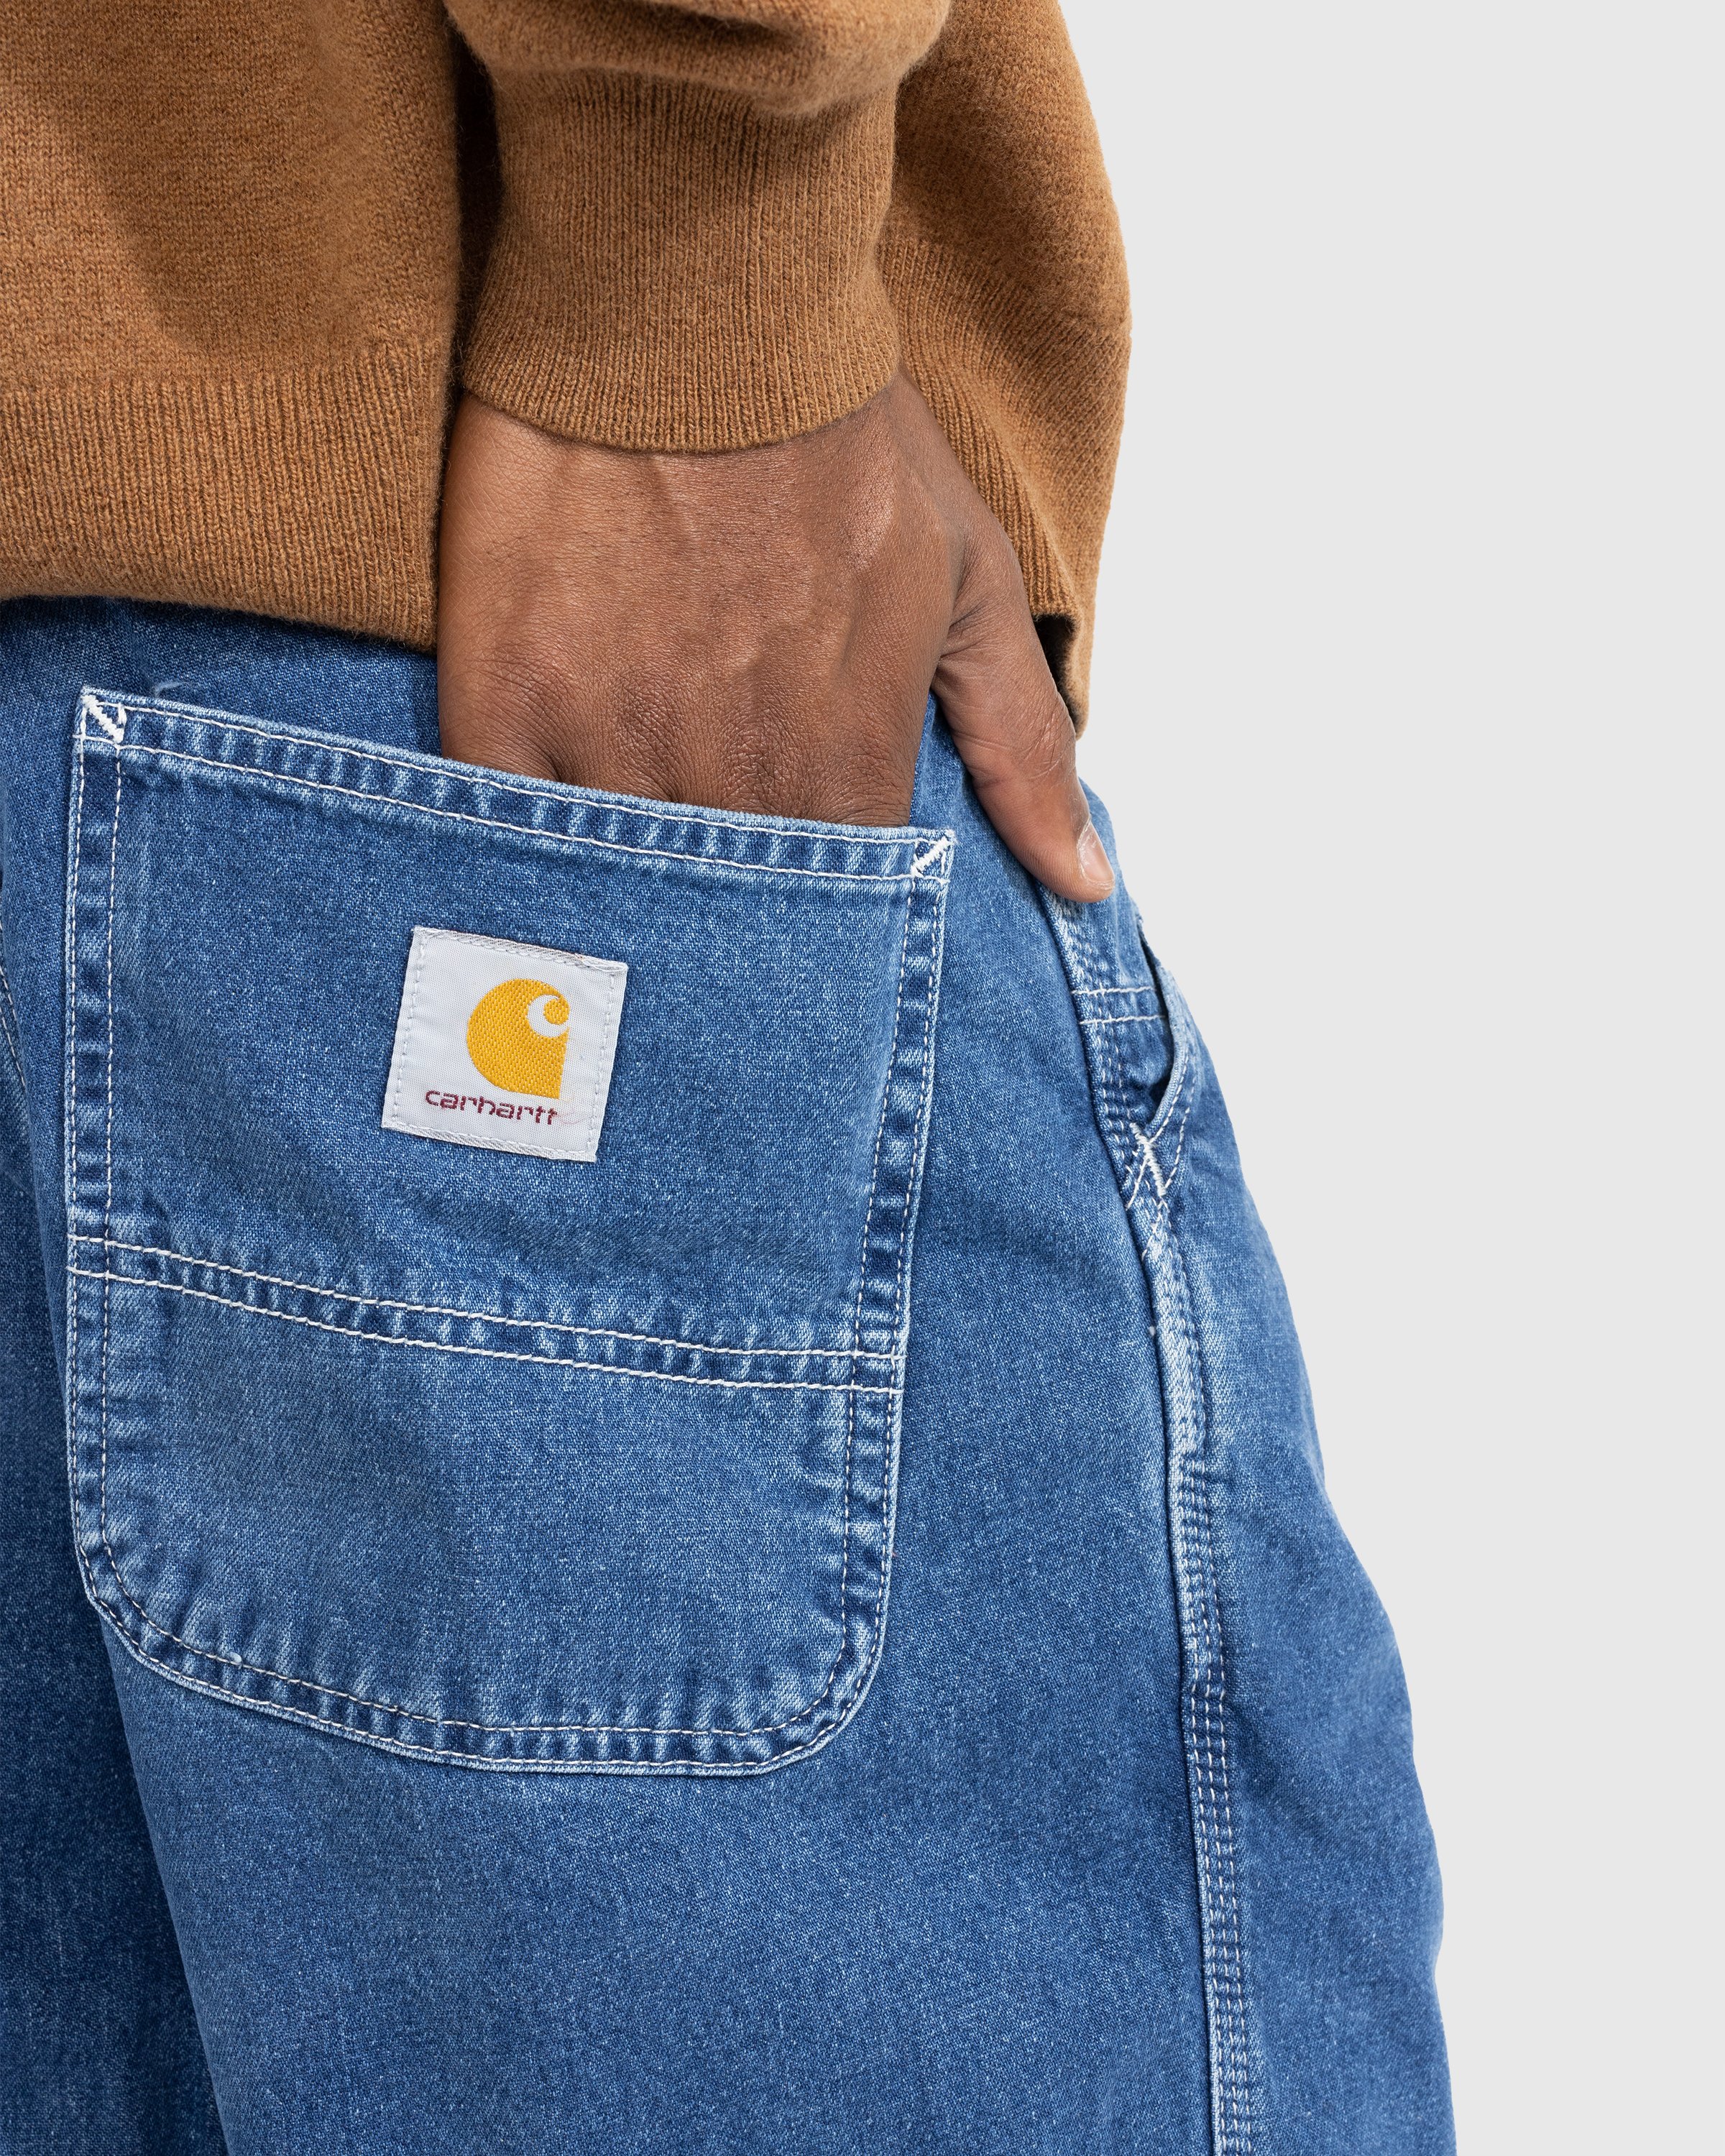 Carhartt WIP - Simple Pant Blue/Stone-Washed - Clothing - Blue - Image 4